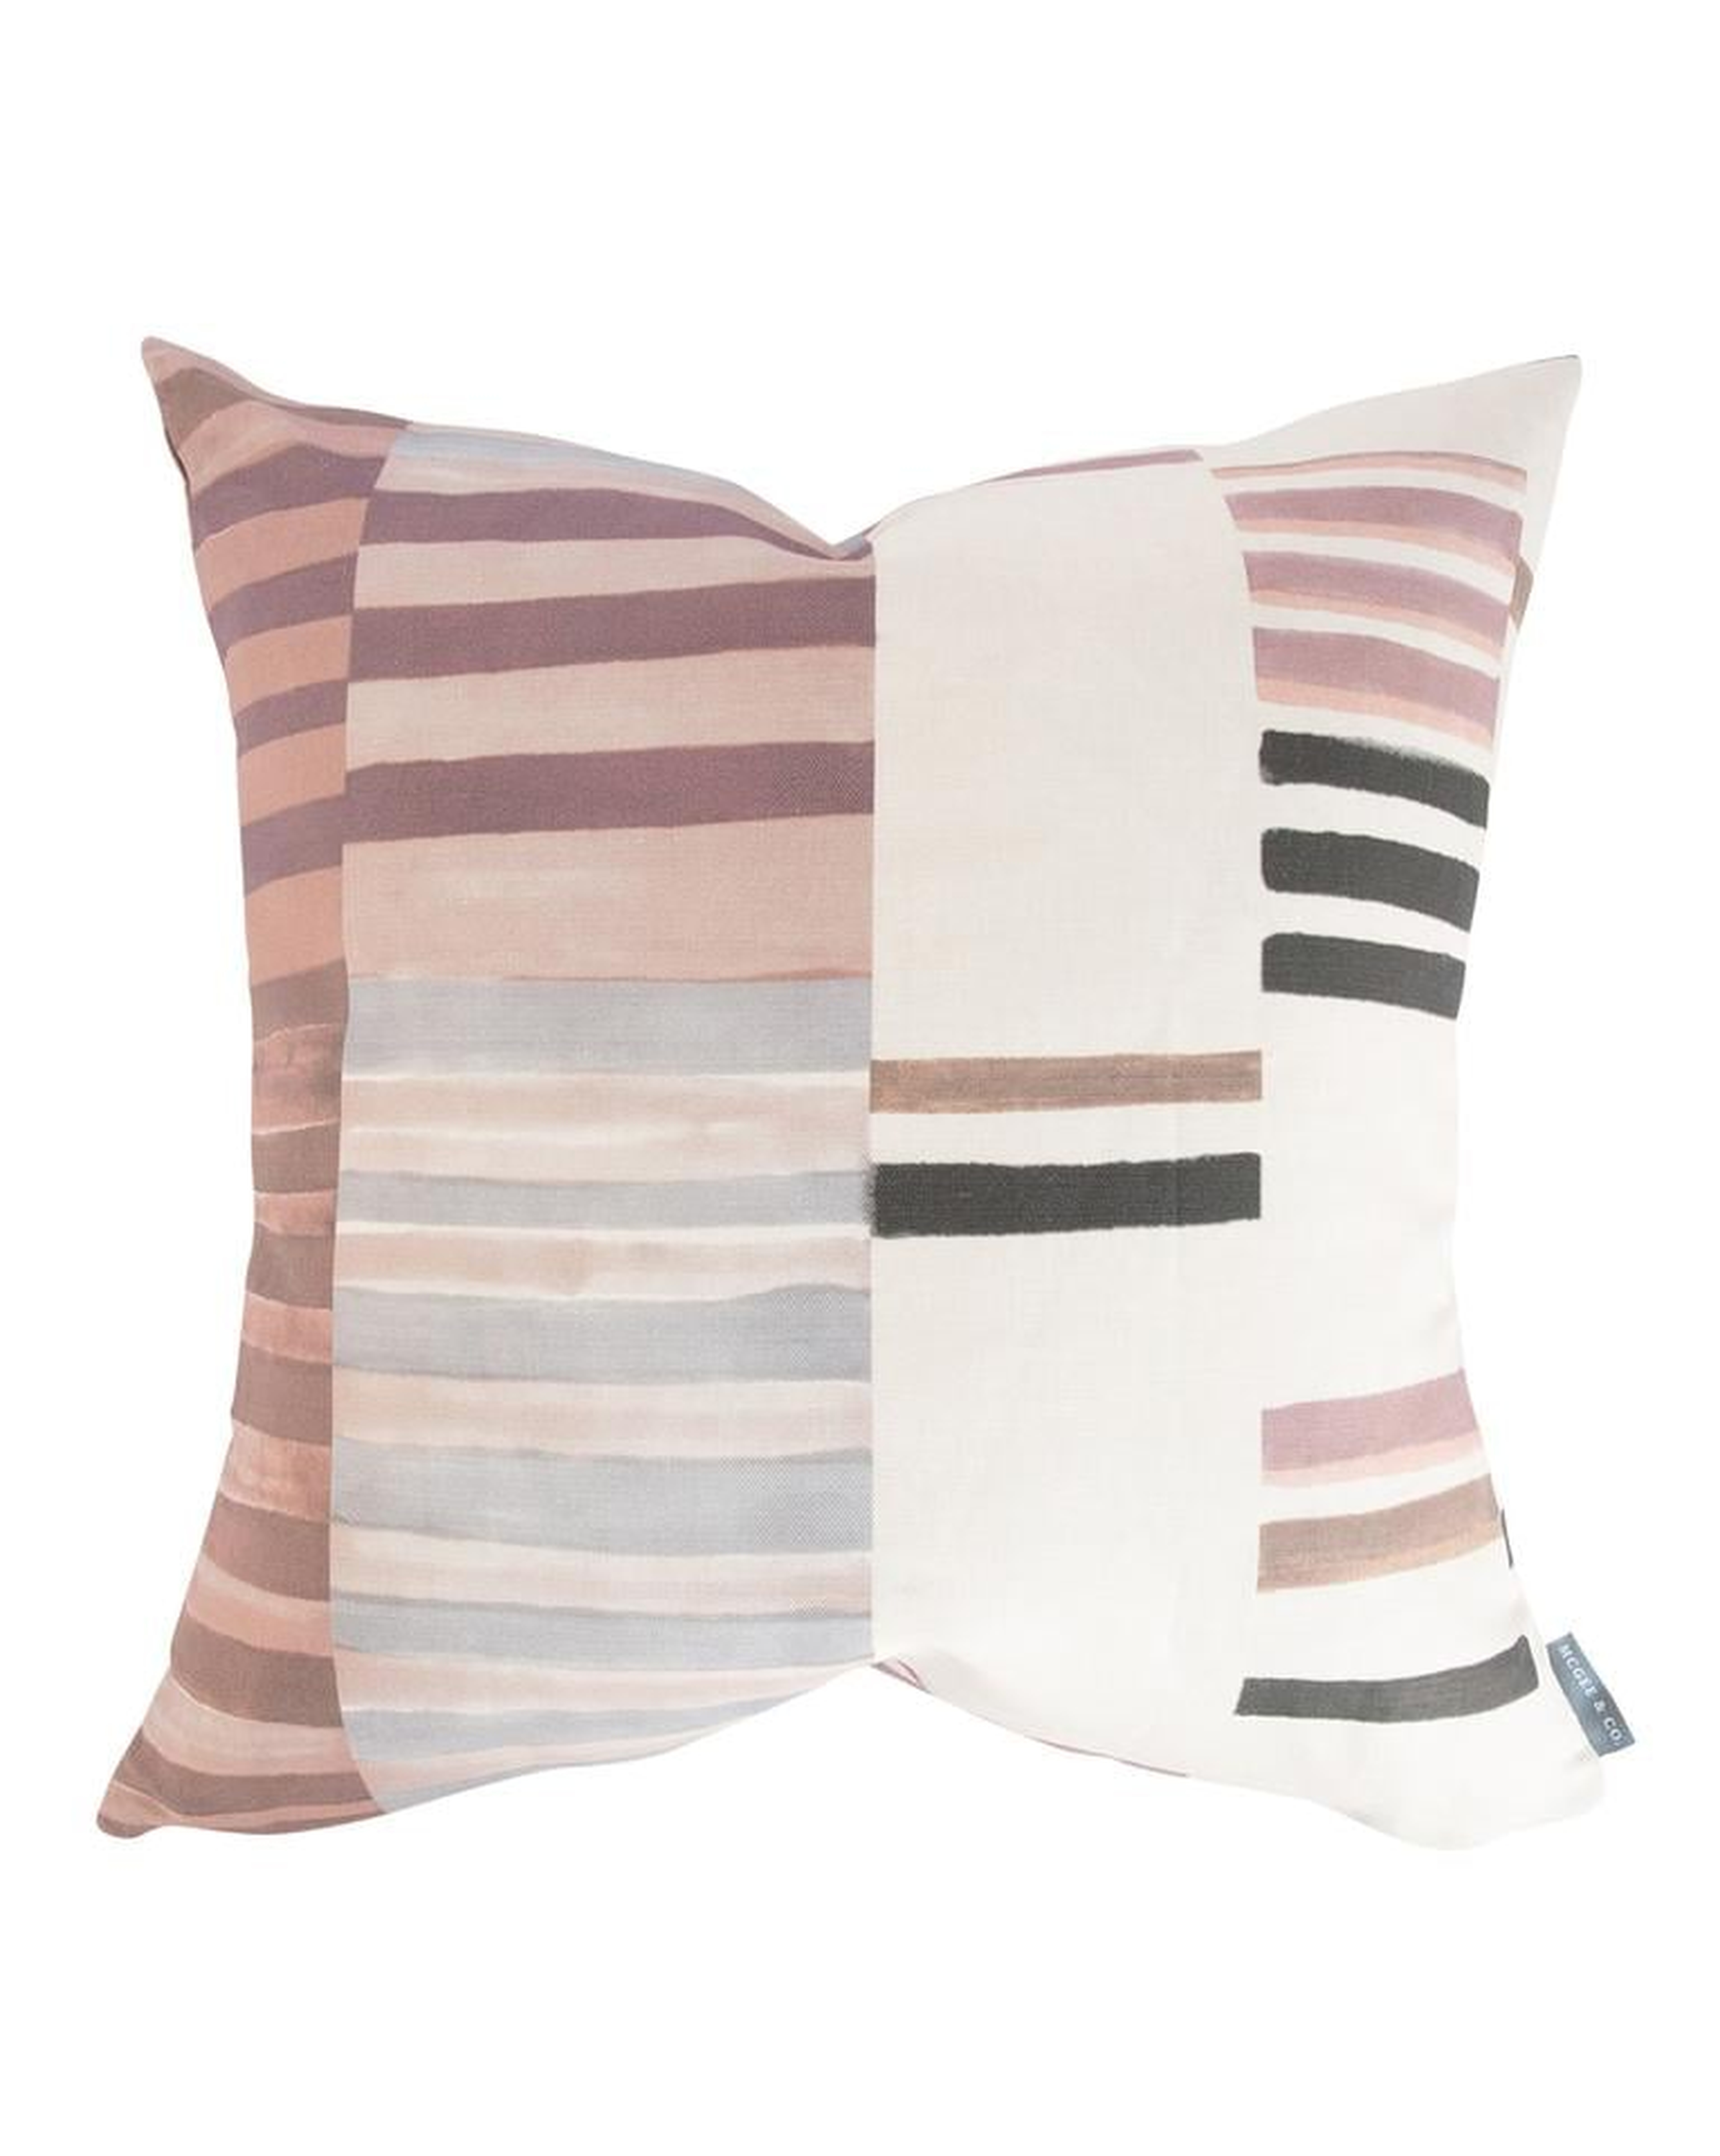 ZOEY PATCHWORK STRIPE PILLOW WITHOUT INSERT, 20" x 20" - McGee & Co.